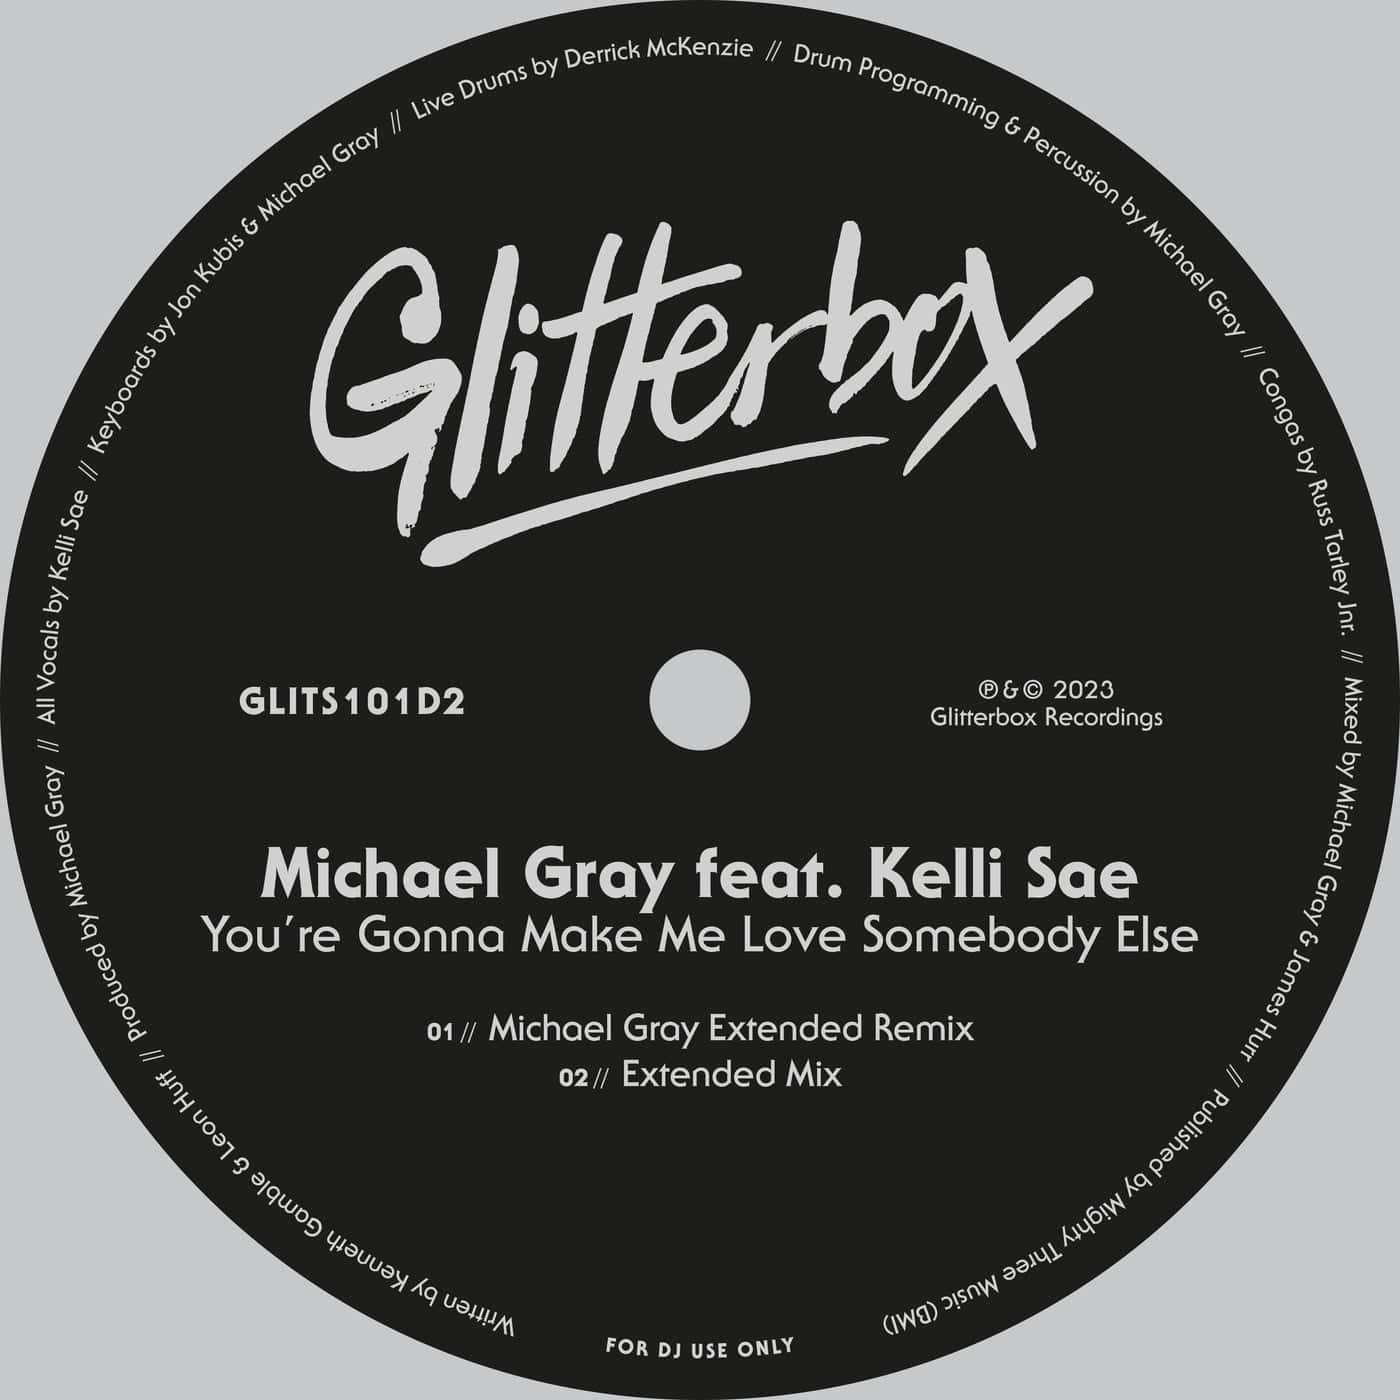 Download Michael Gray, Kelli Sae - You're Gonna Make Me Love Somebody Else on Electrobuzz